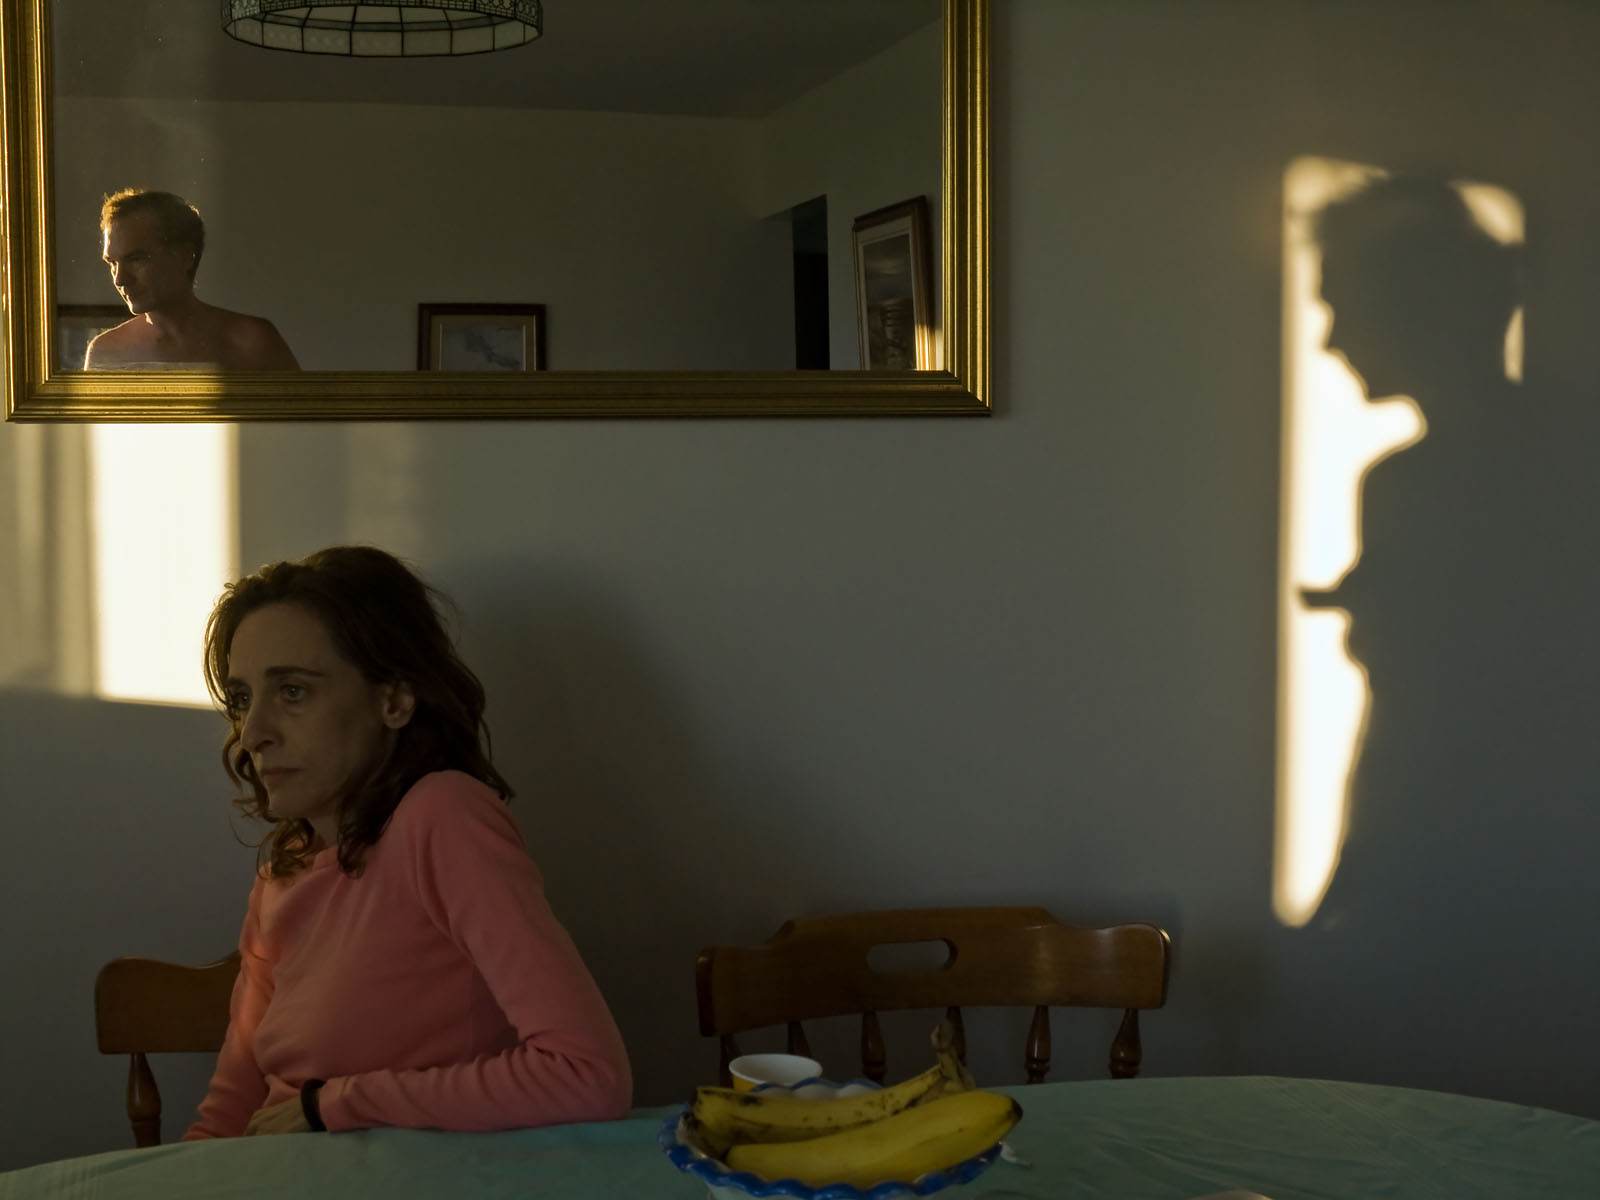 Scenes From a Life: Intimate Couples, Mirror and Shadow